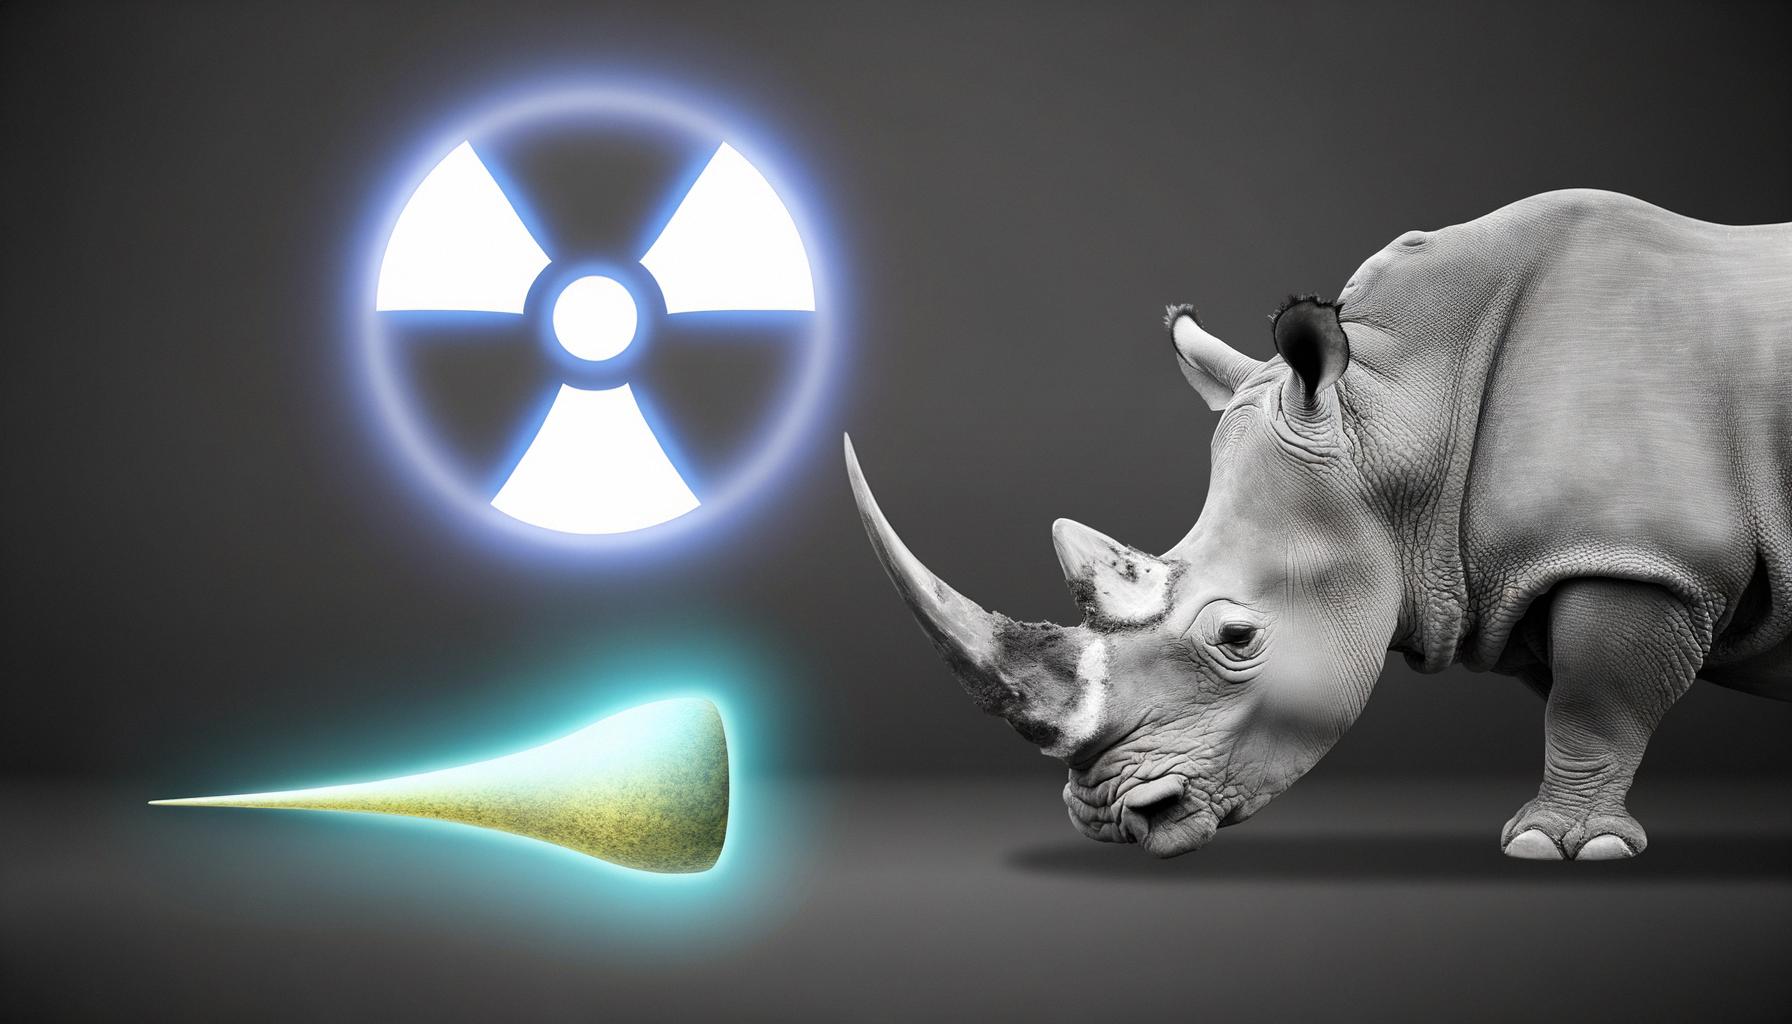 Radioactive isotopes implanted in rhino horns to deter poaching